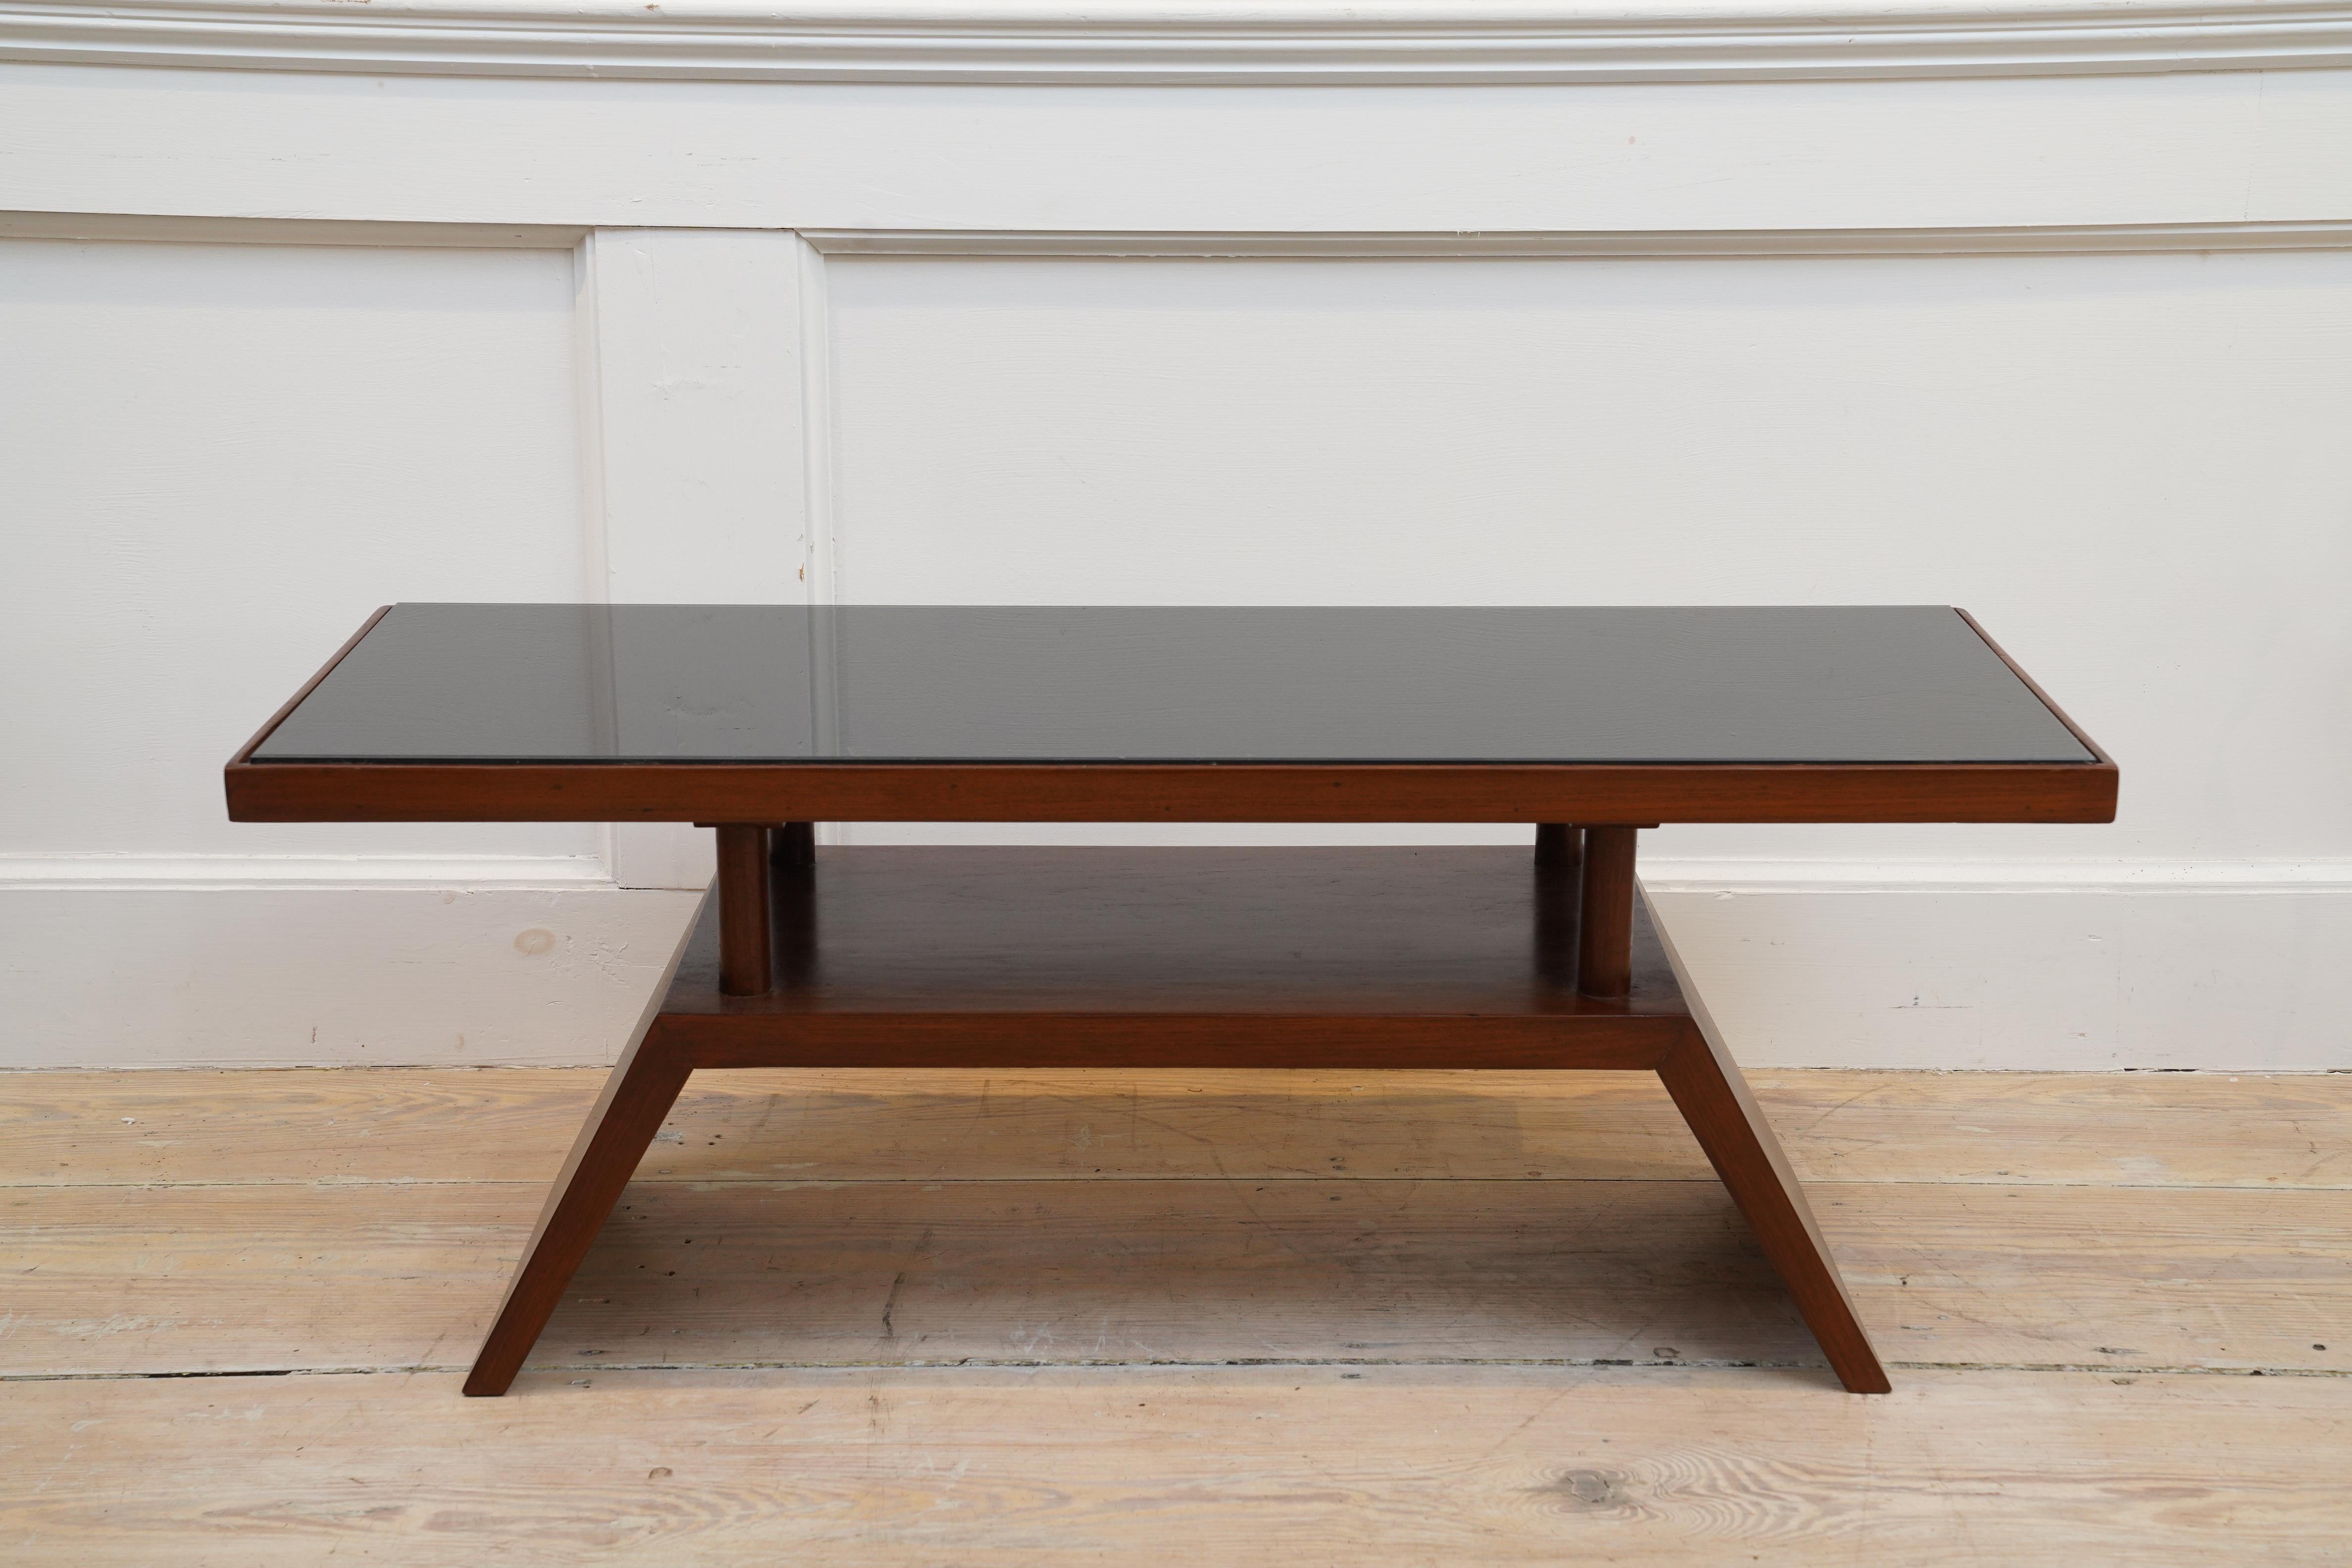 A stunning and architectural teak wood coffee table with recessed black glass top. Mid-Century Modern, 1970's.